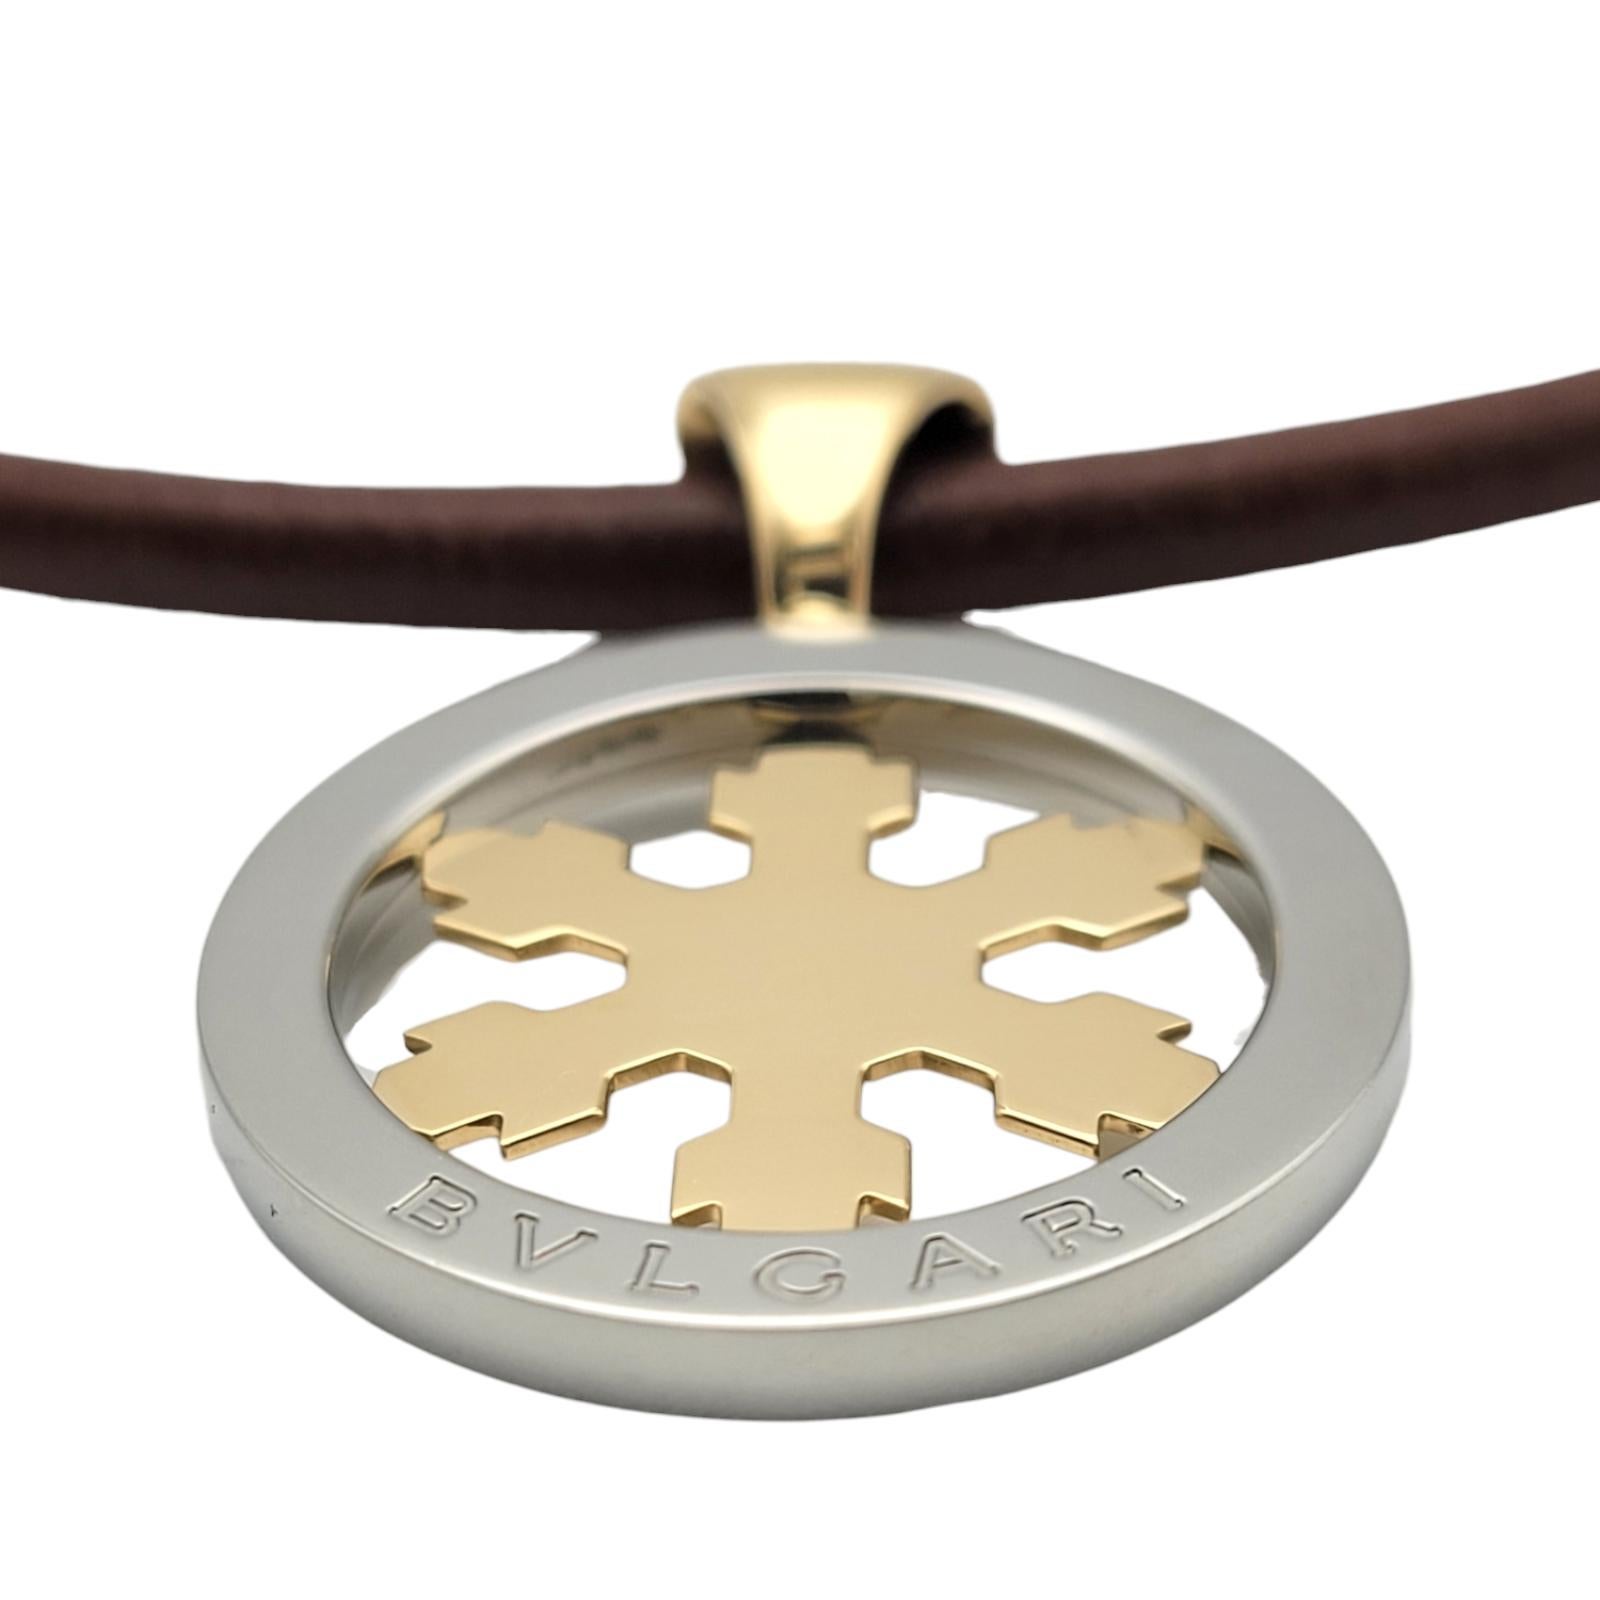 Contemporary Bvlgari Tondo Snowflake Leather Necklace in 18k Yellow Gold & Stainless Steel